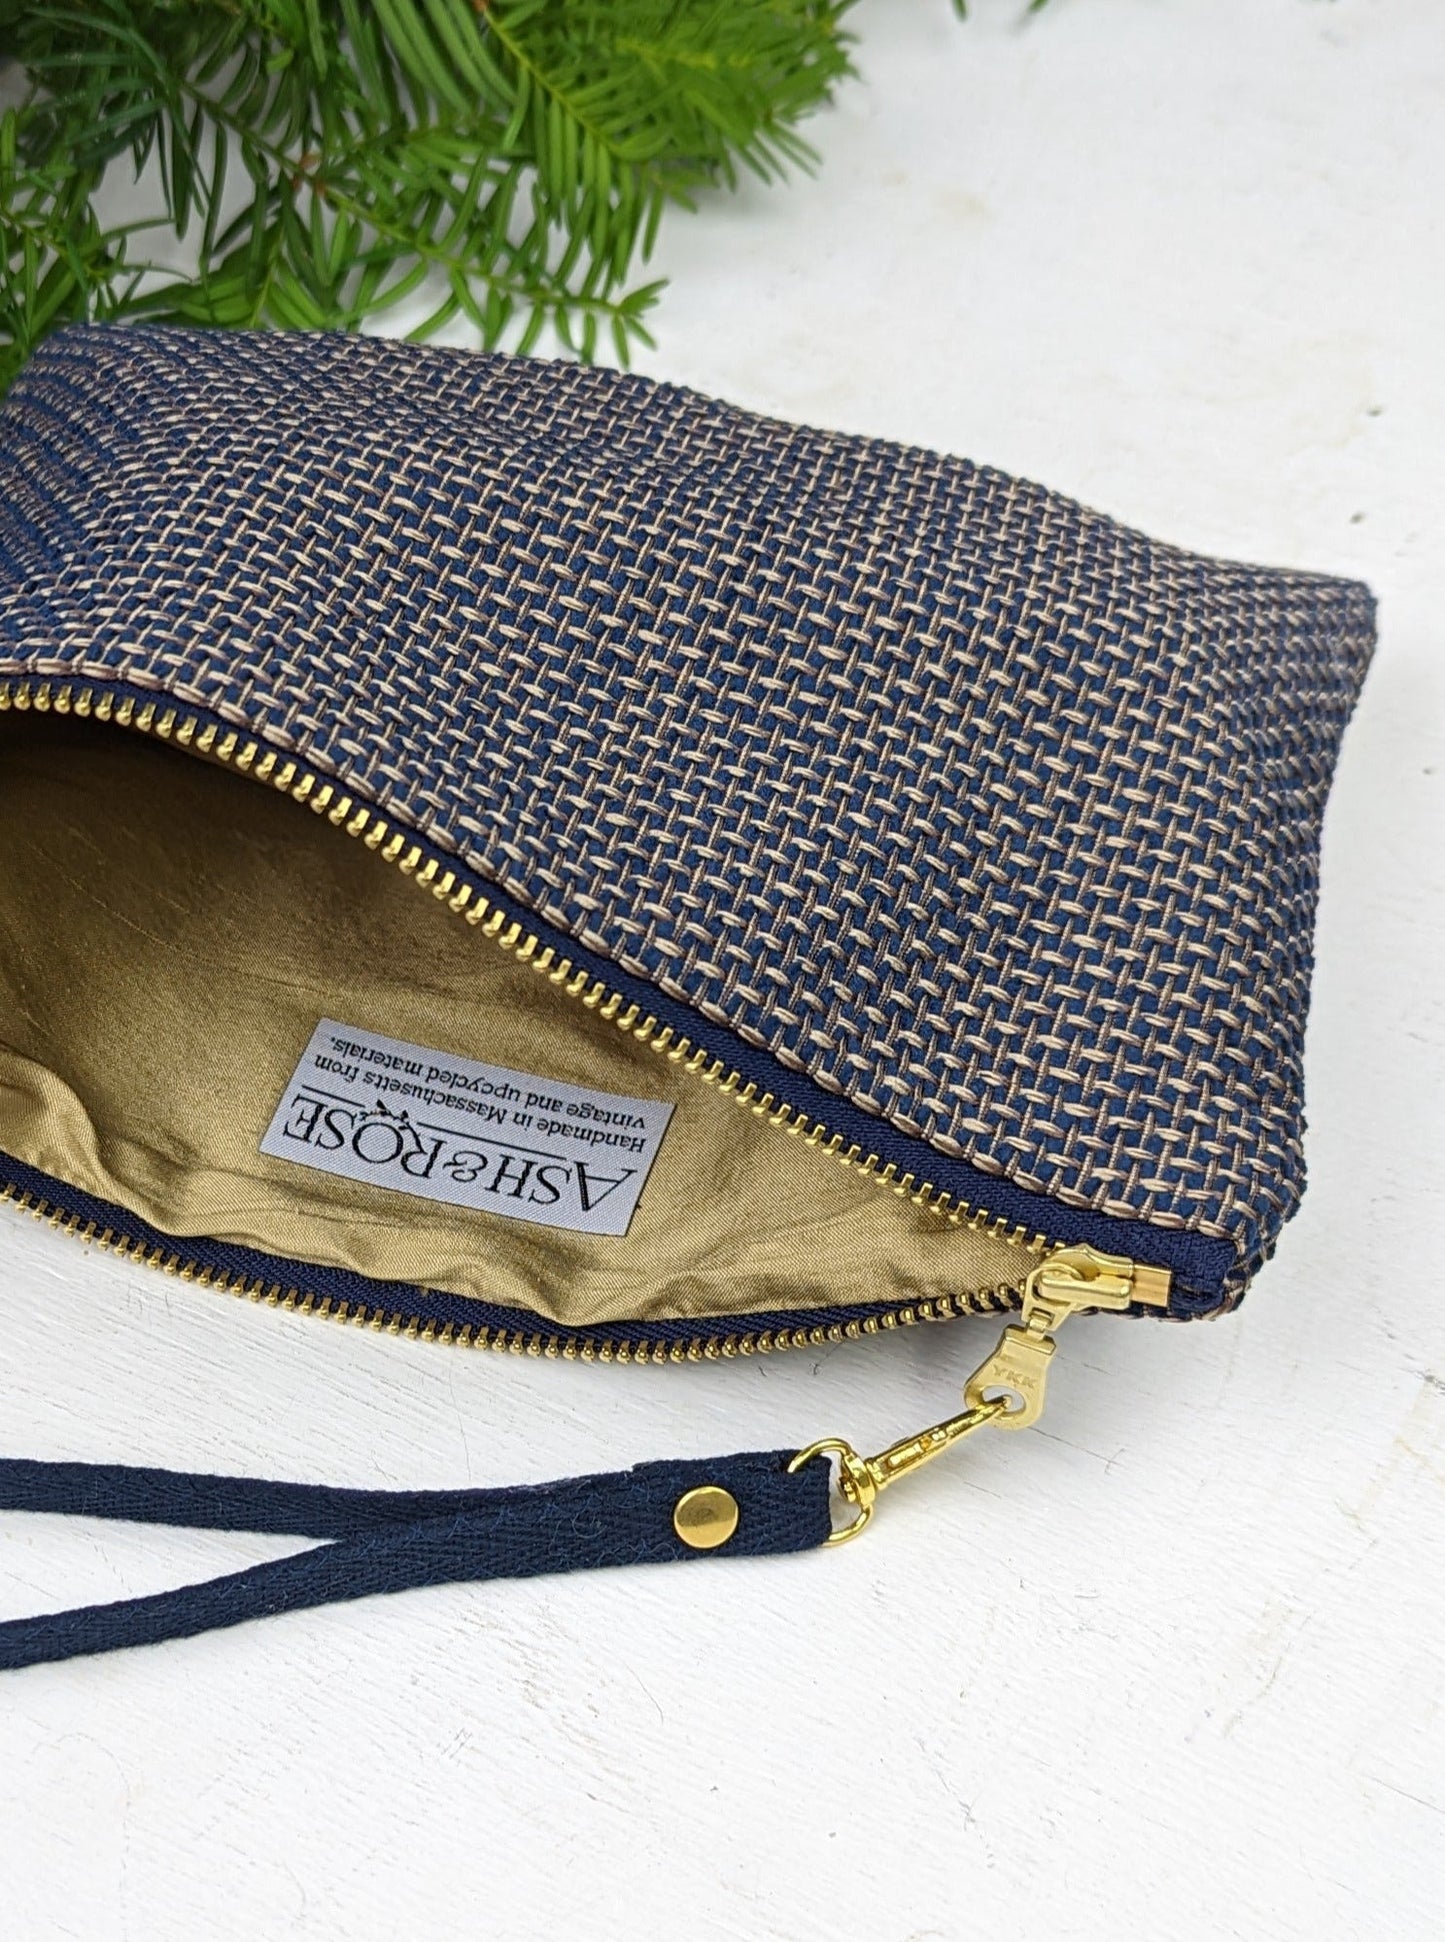 Golden Navy Tweed Purse by Ash & Rose